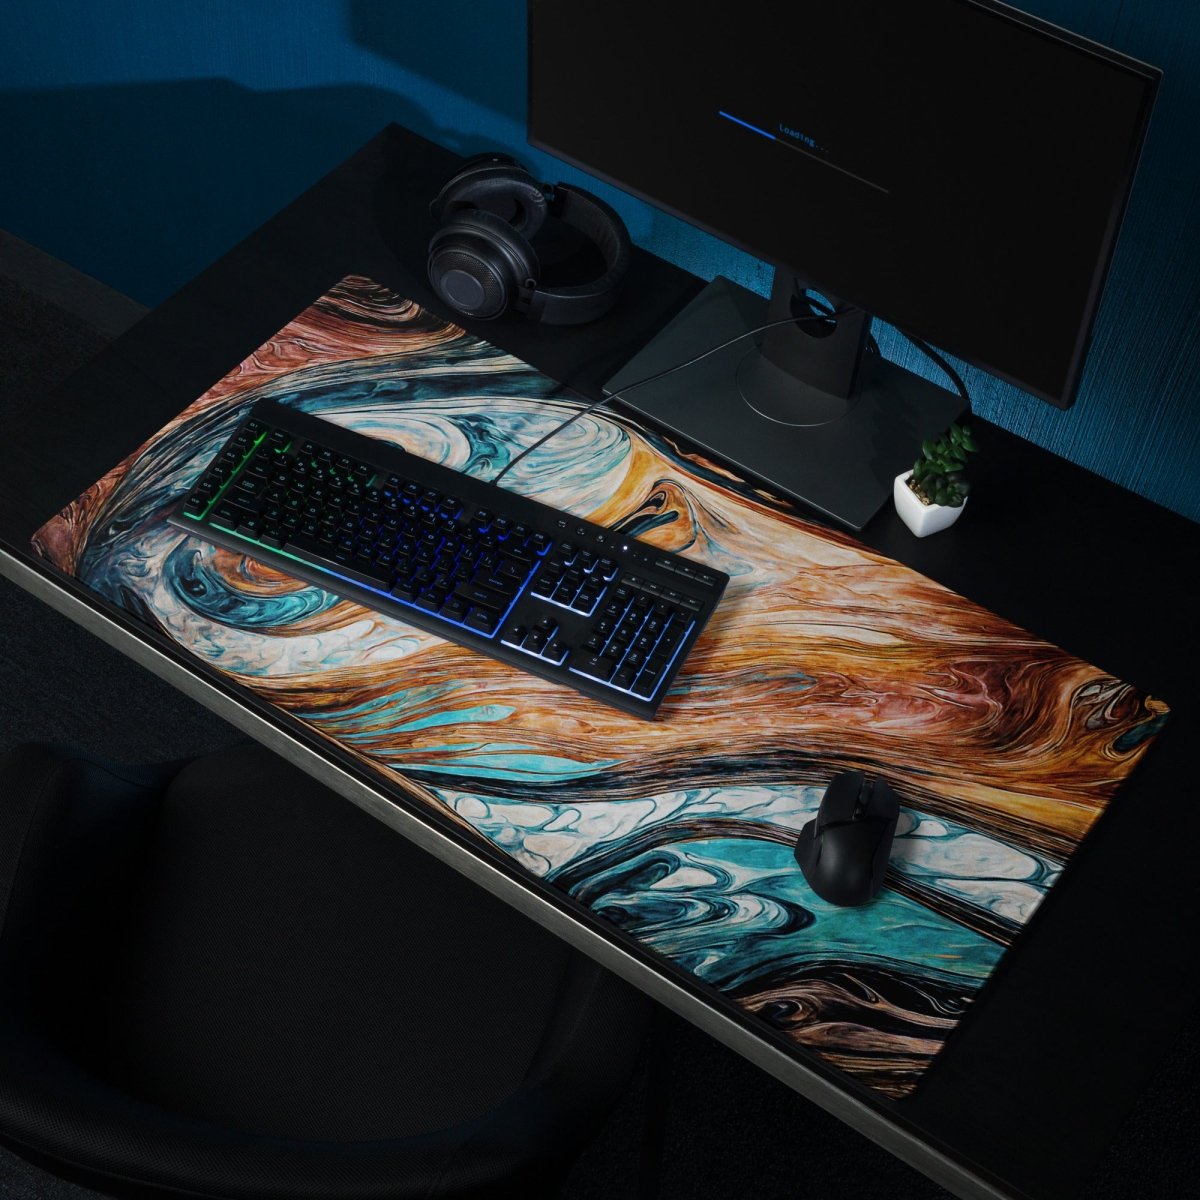 Cosmic whirl - Gaming mouse pad - Ever colorful